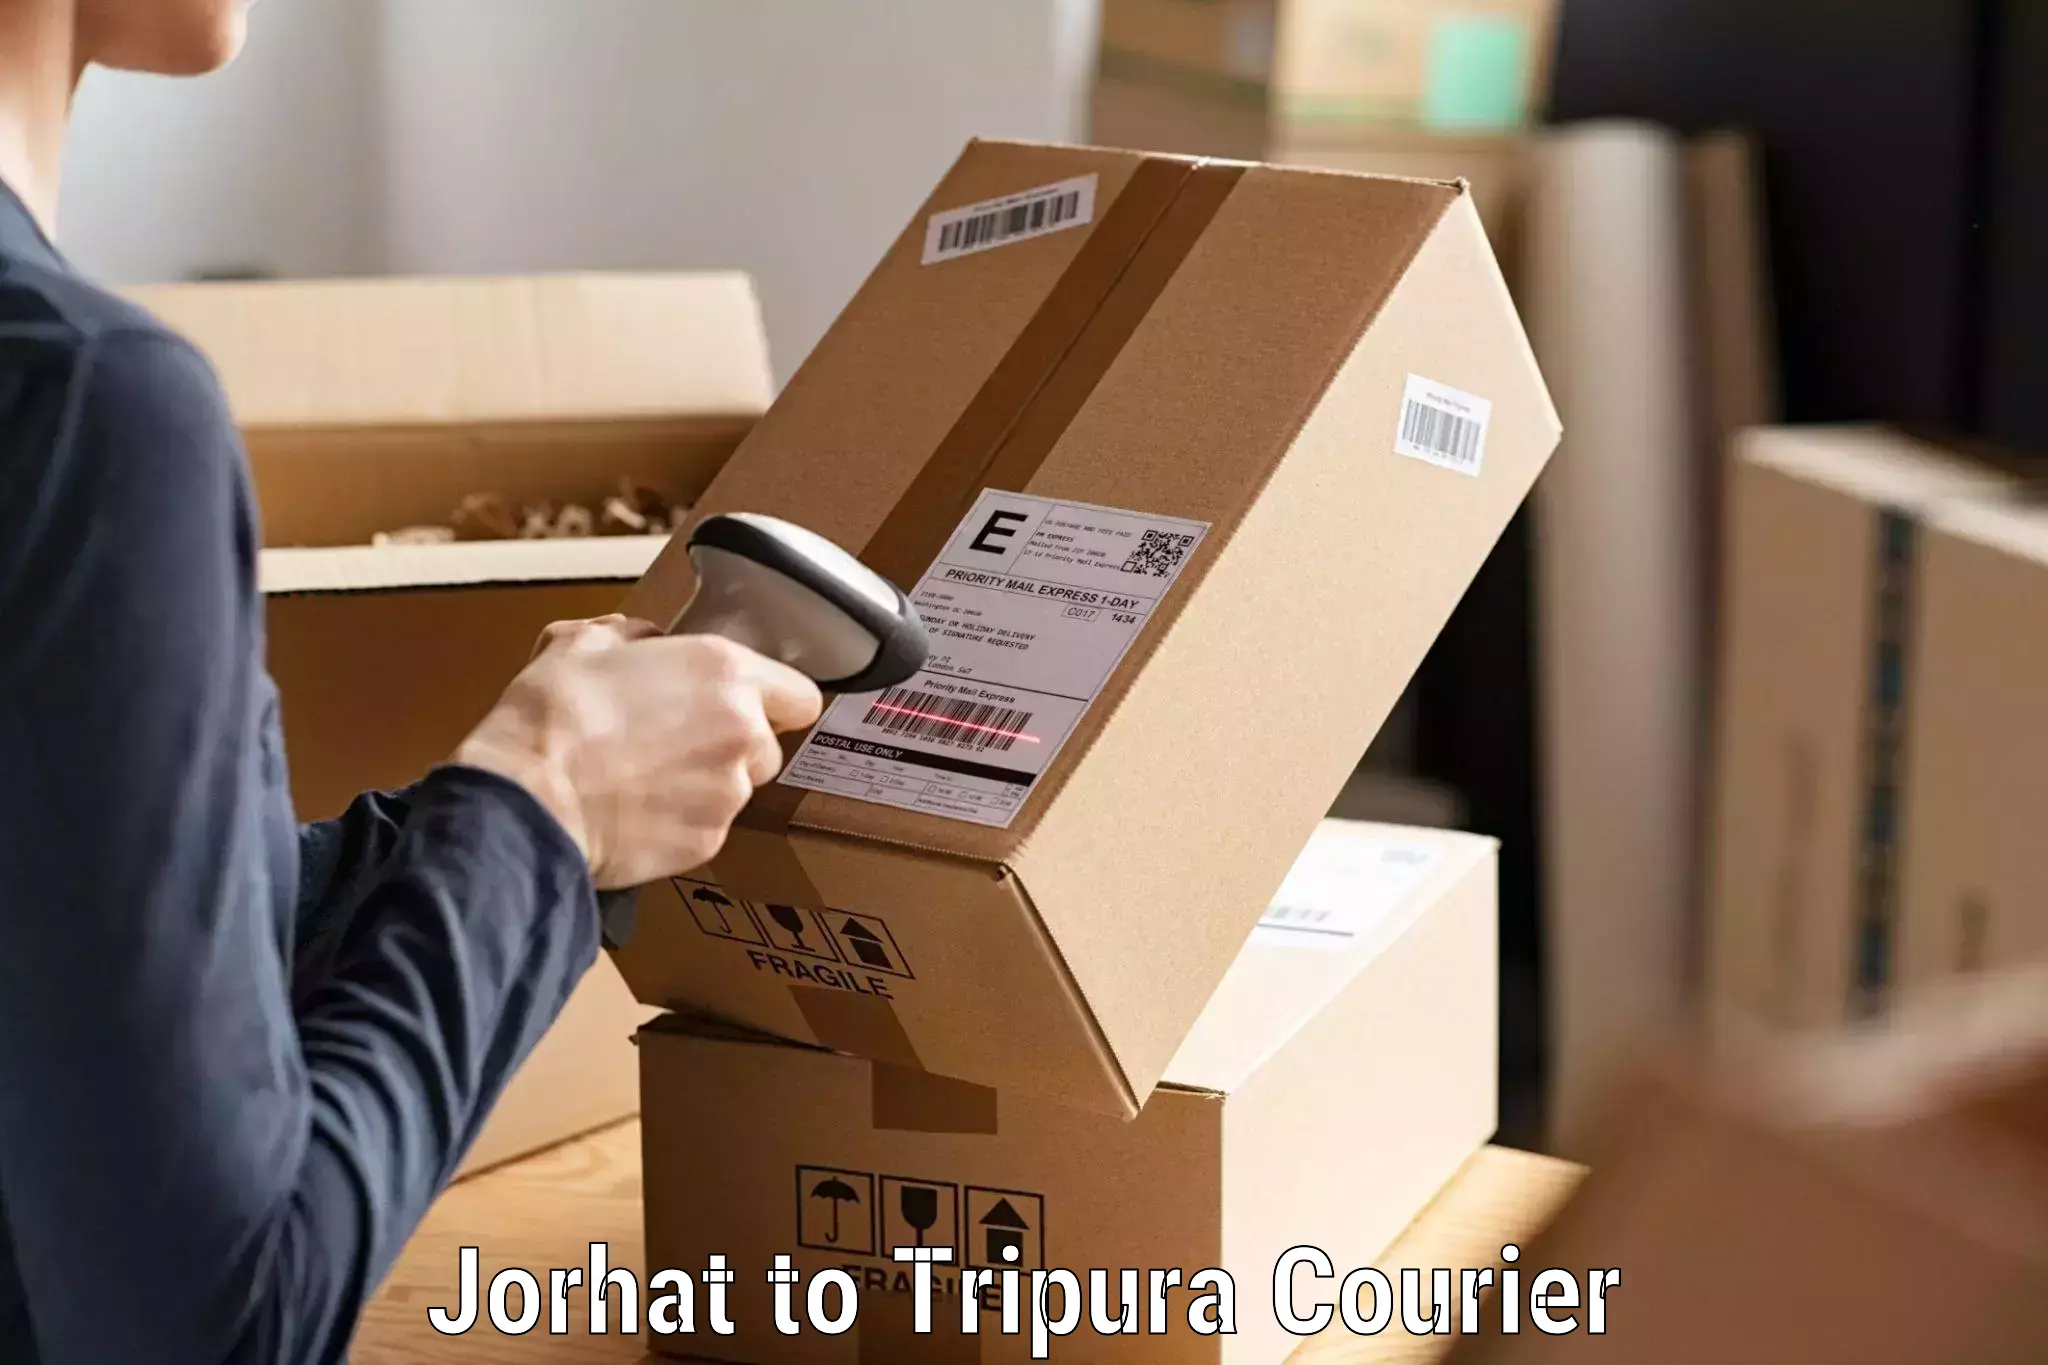 Full-service courier options Jorhat to Agartala